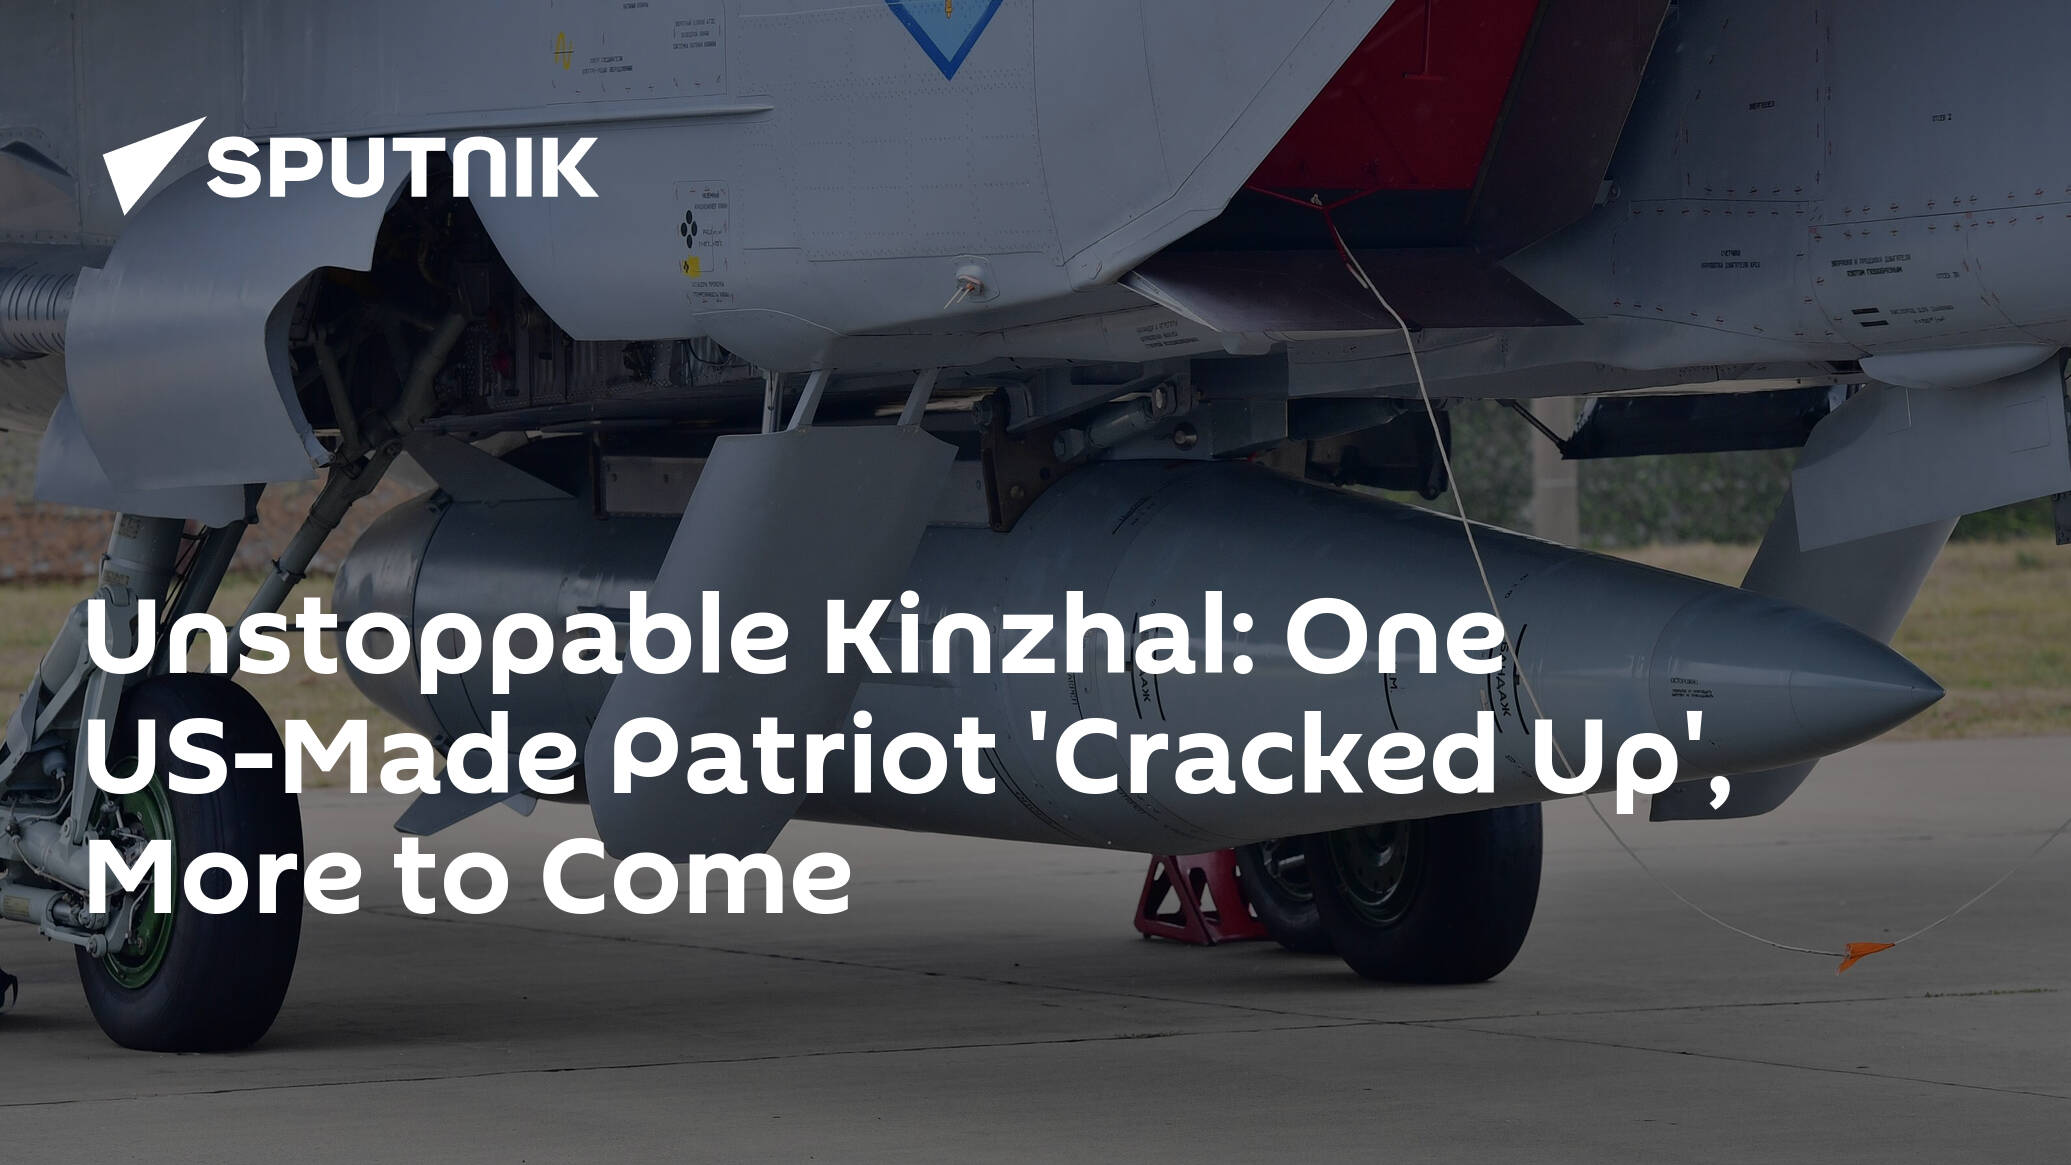 Unstoppable Kinzhal: One US-Made Patriot 'Cracked Up', More to Come